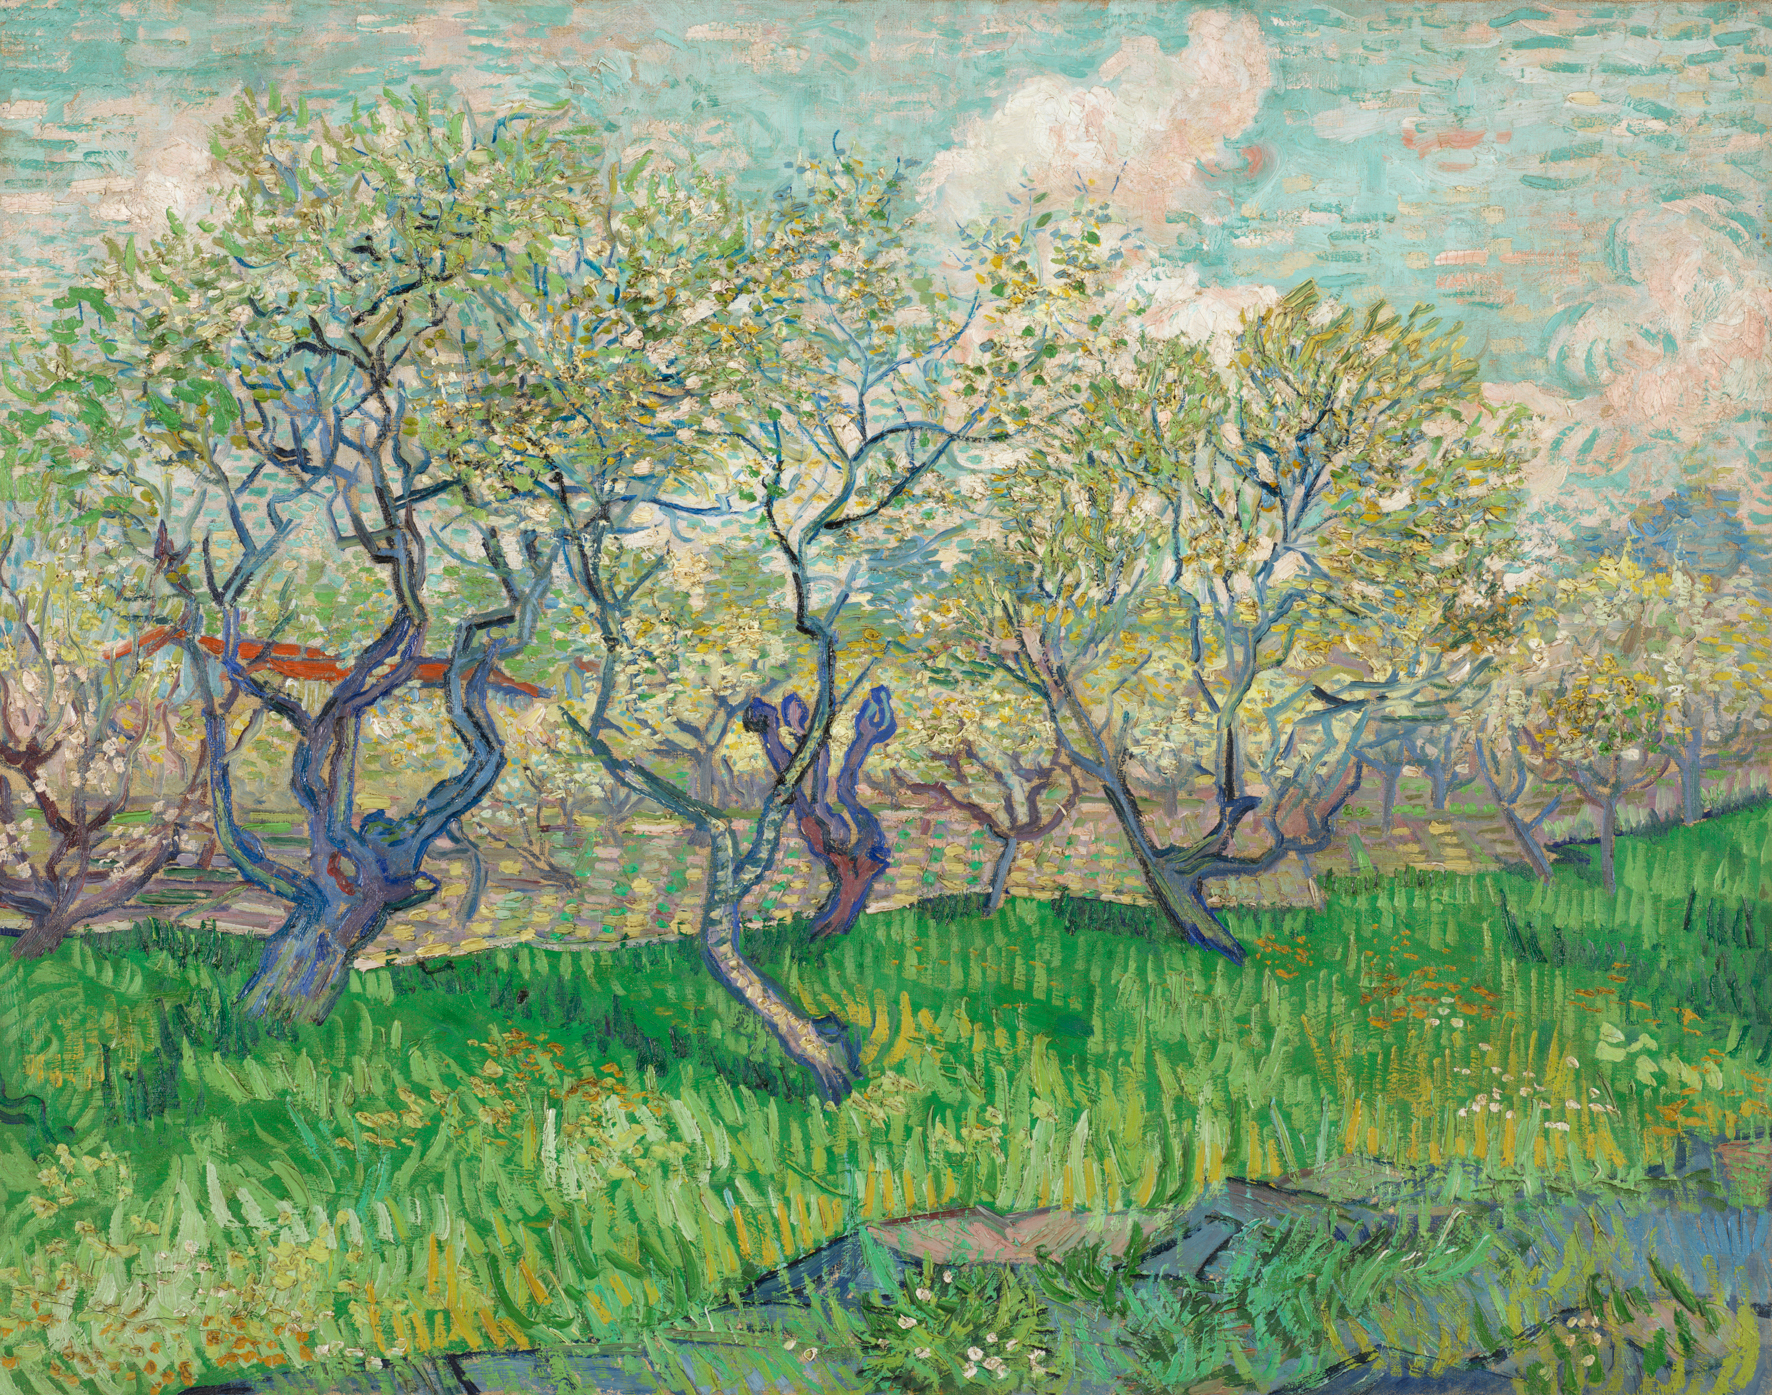 Painting by Vincent van Gogh, Orchard in Blossom (1889)